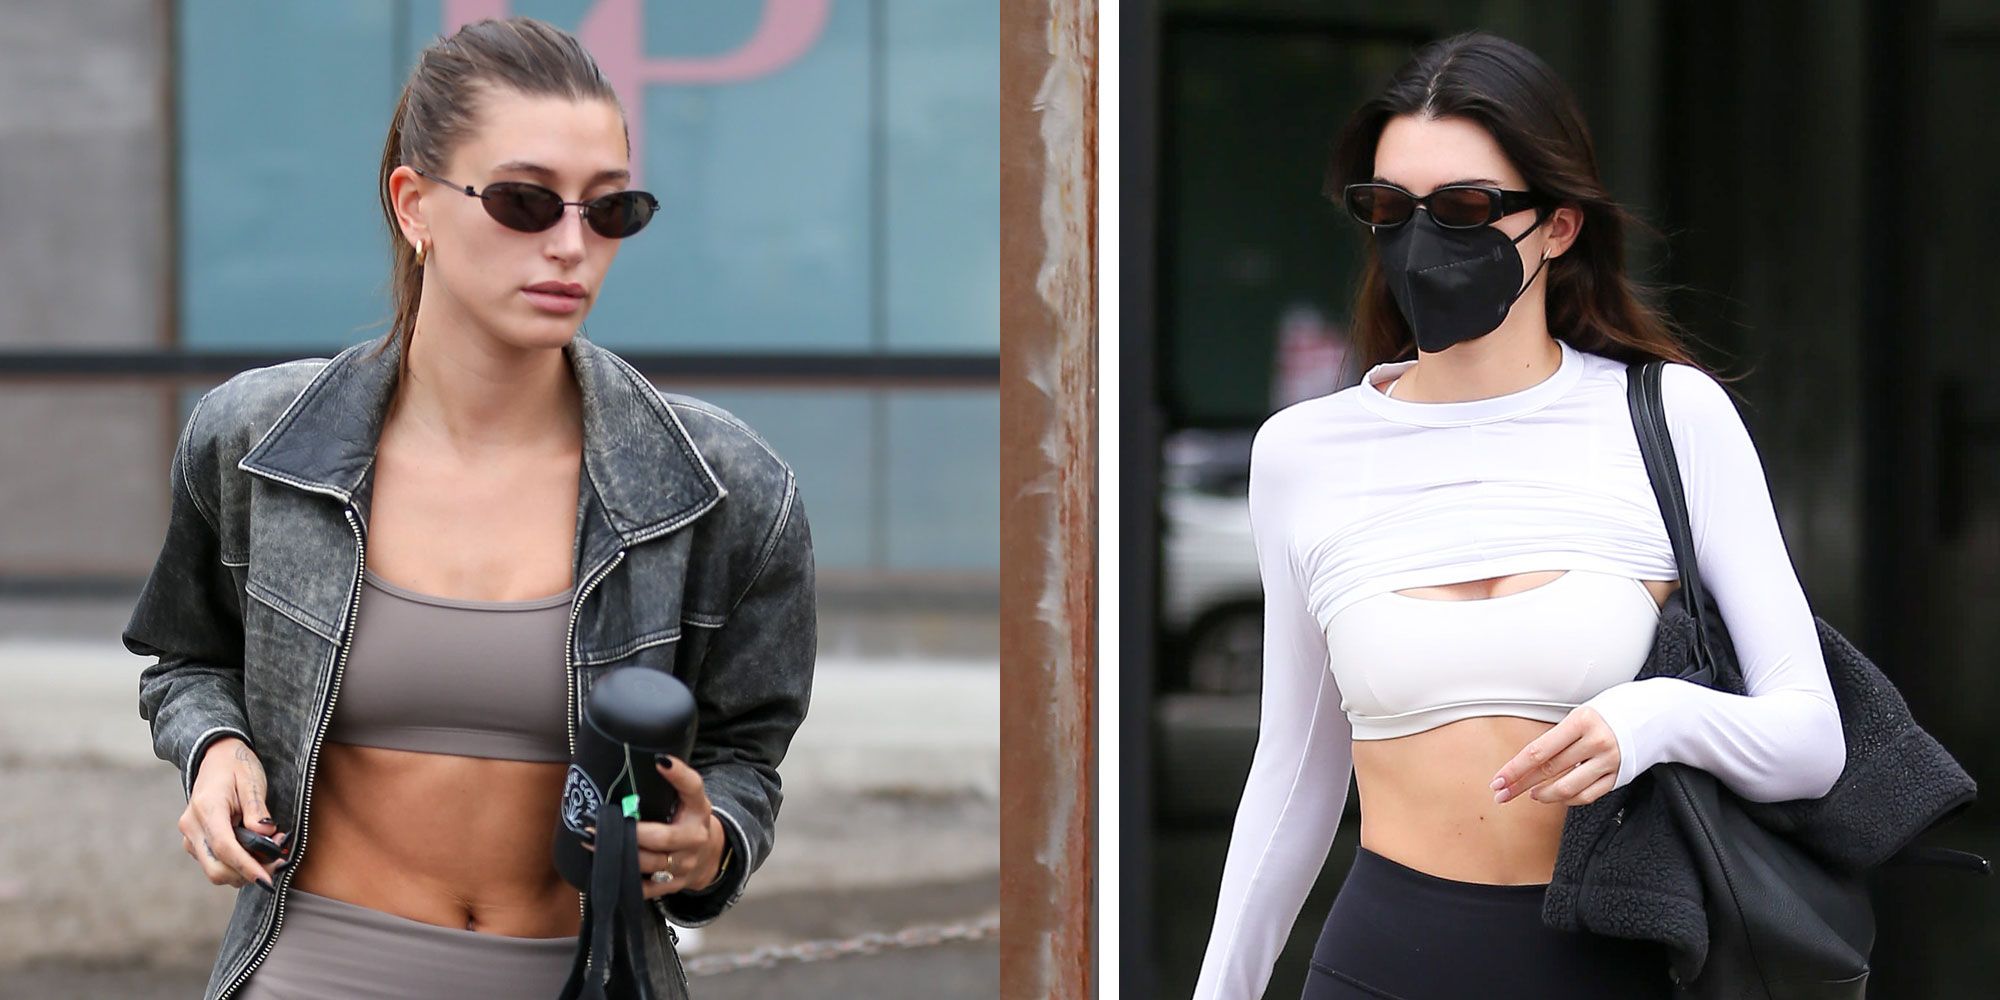 Kendall Jenner and Hailey Bieber showcase their figures in leggings